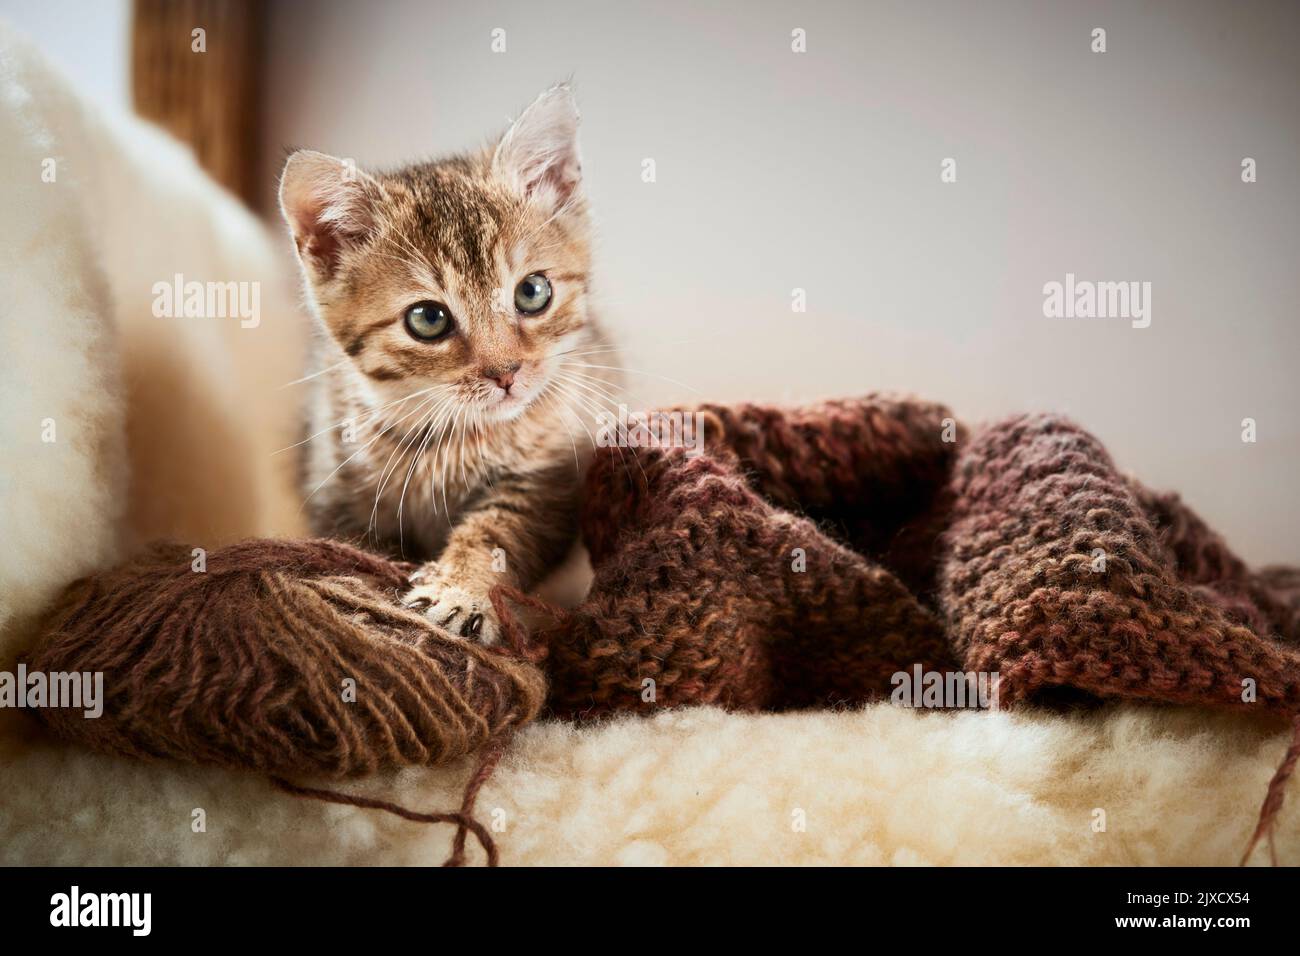 Domestic cat. A tabby kitten on a wicker chair with knitting utensils. Germany Stock Photo